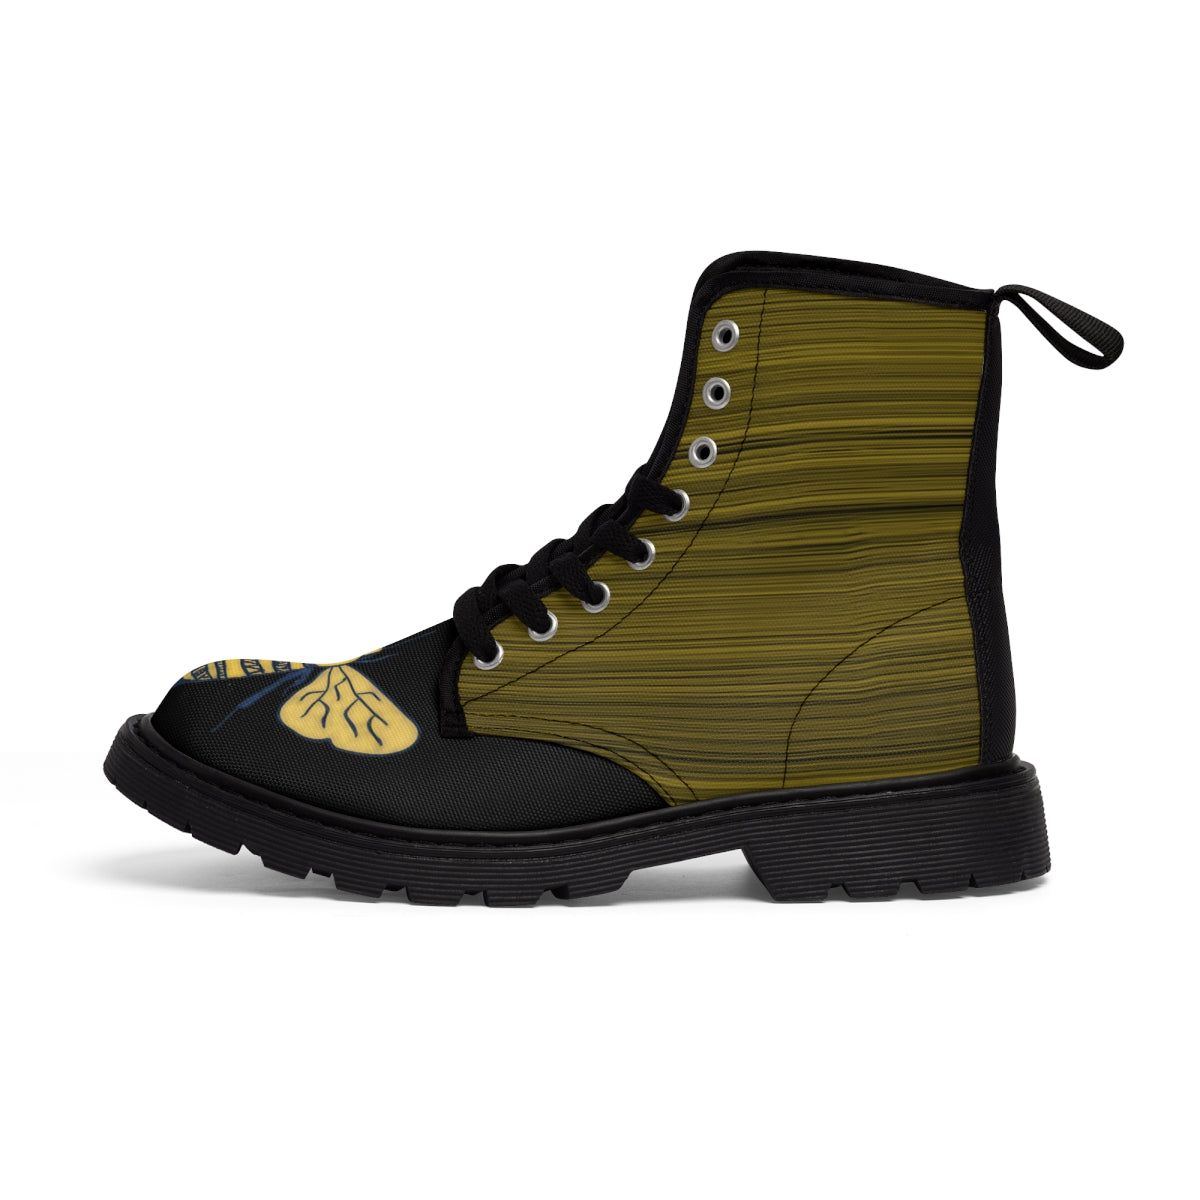 Deep Yellow Doodle Bee Painted Women's Canvas Boots Shoes Bee boots original art boots Shoes unique womens boots vegan boots vegan combat boots womens boots womens fashion boots